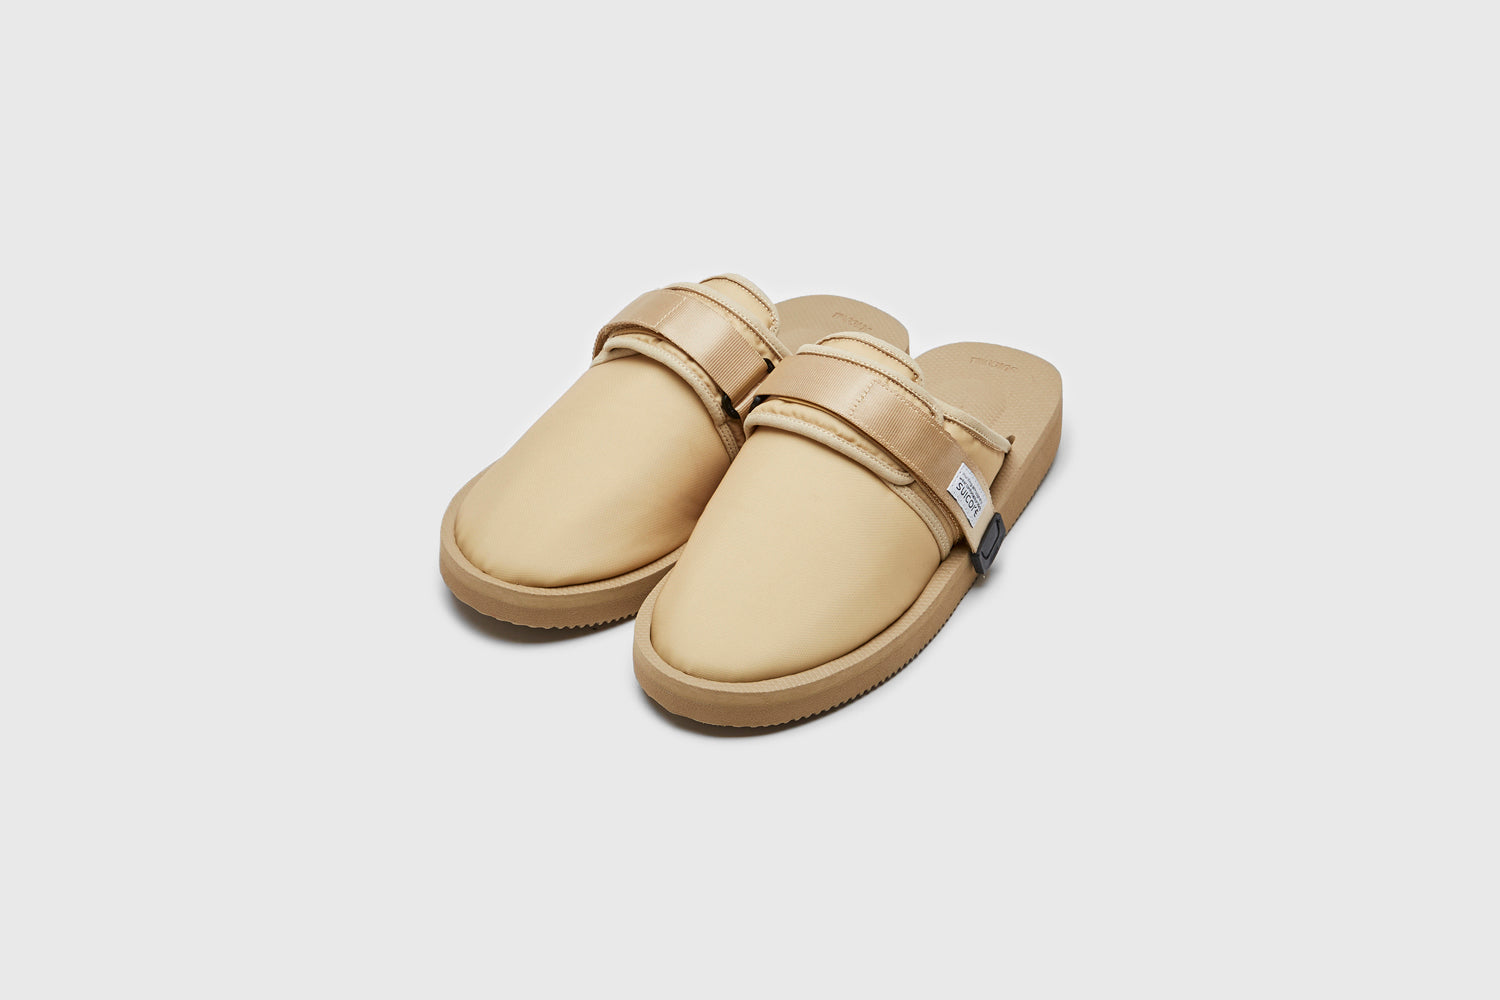 SUICOKE ZAVO-Cab slides with beige nylon upper, beige midsole and sole, straps and logo patch. From Spring/Summer 2023 collection on eightywingold Web Store, an official partner of SUICOKE. OG-072CAB BEIGE